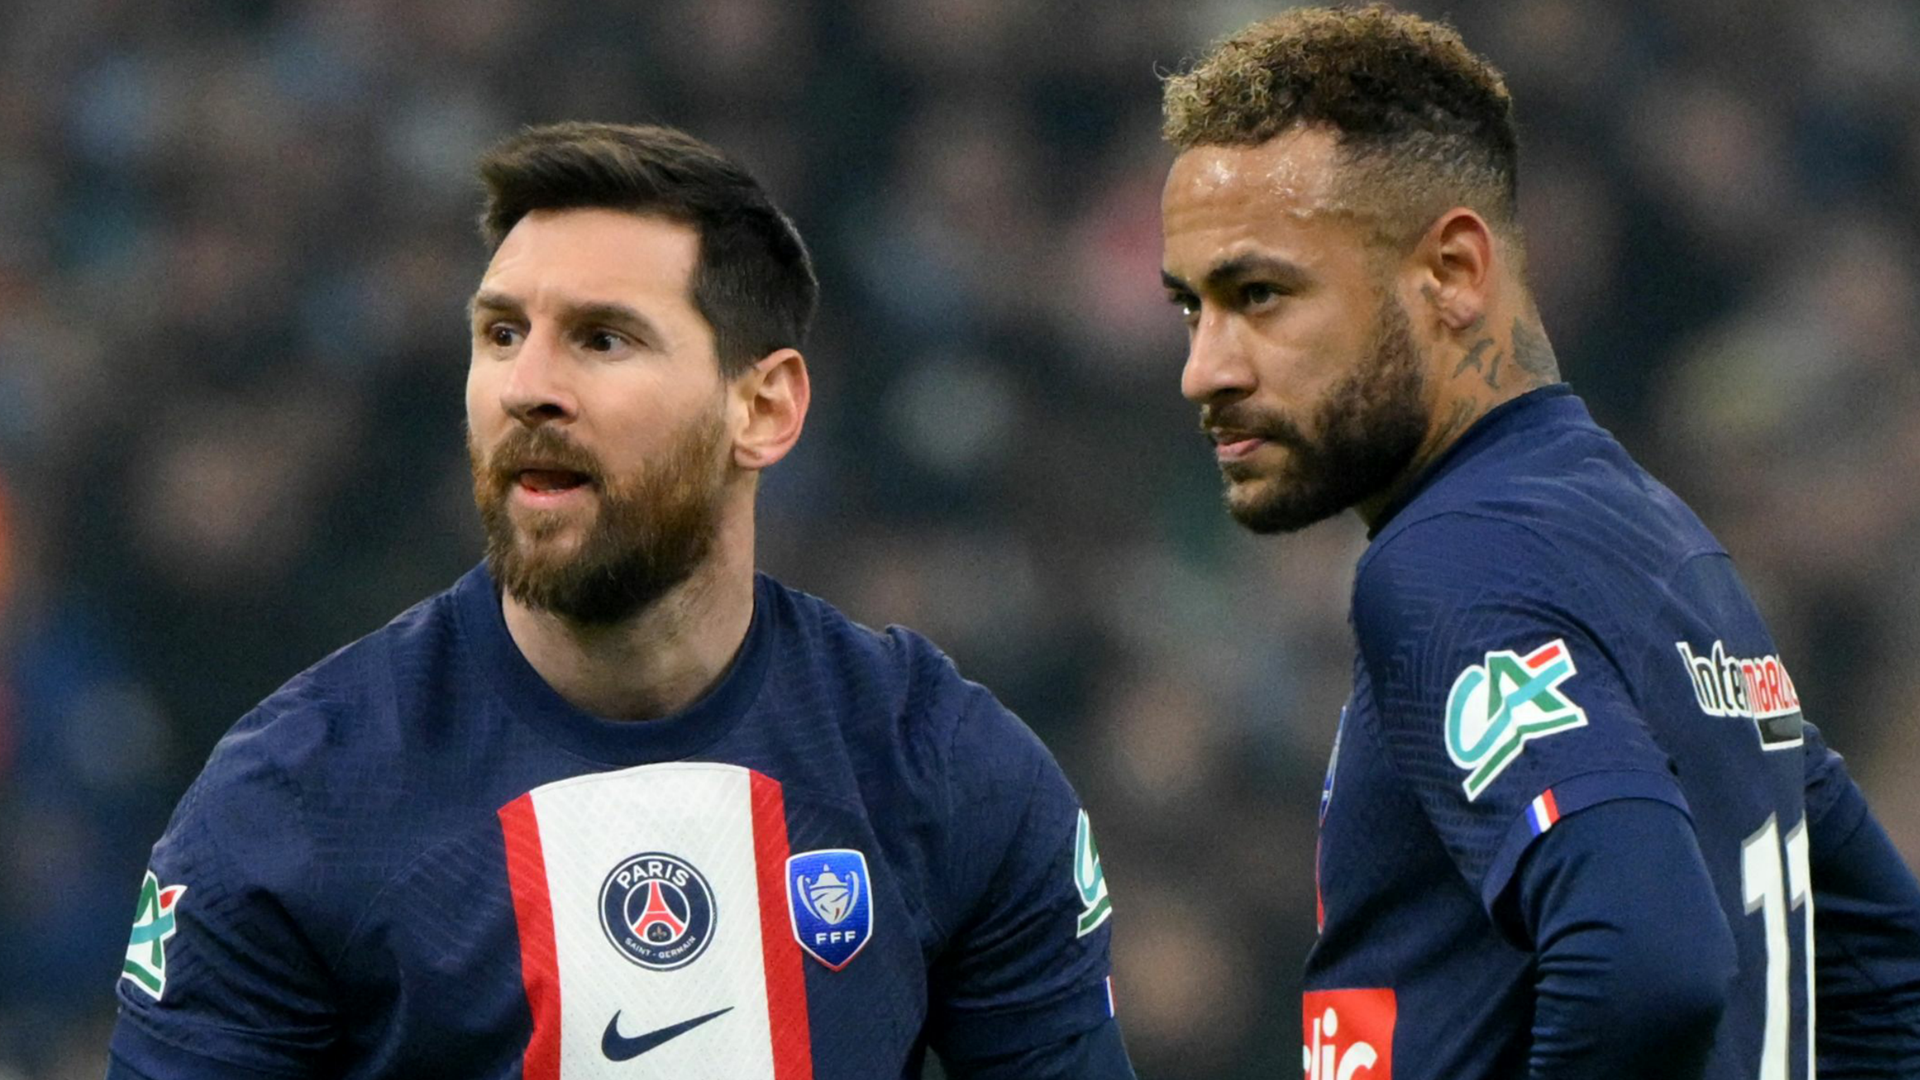 Lionel Messi hails ‘beautiful person’ Neymar after PSG exit ends the duo’s second spell together